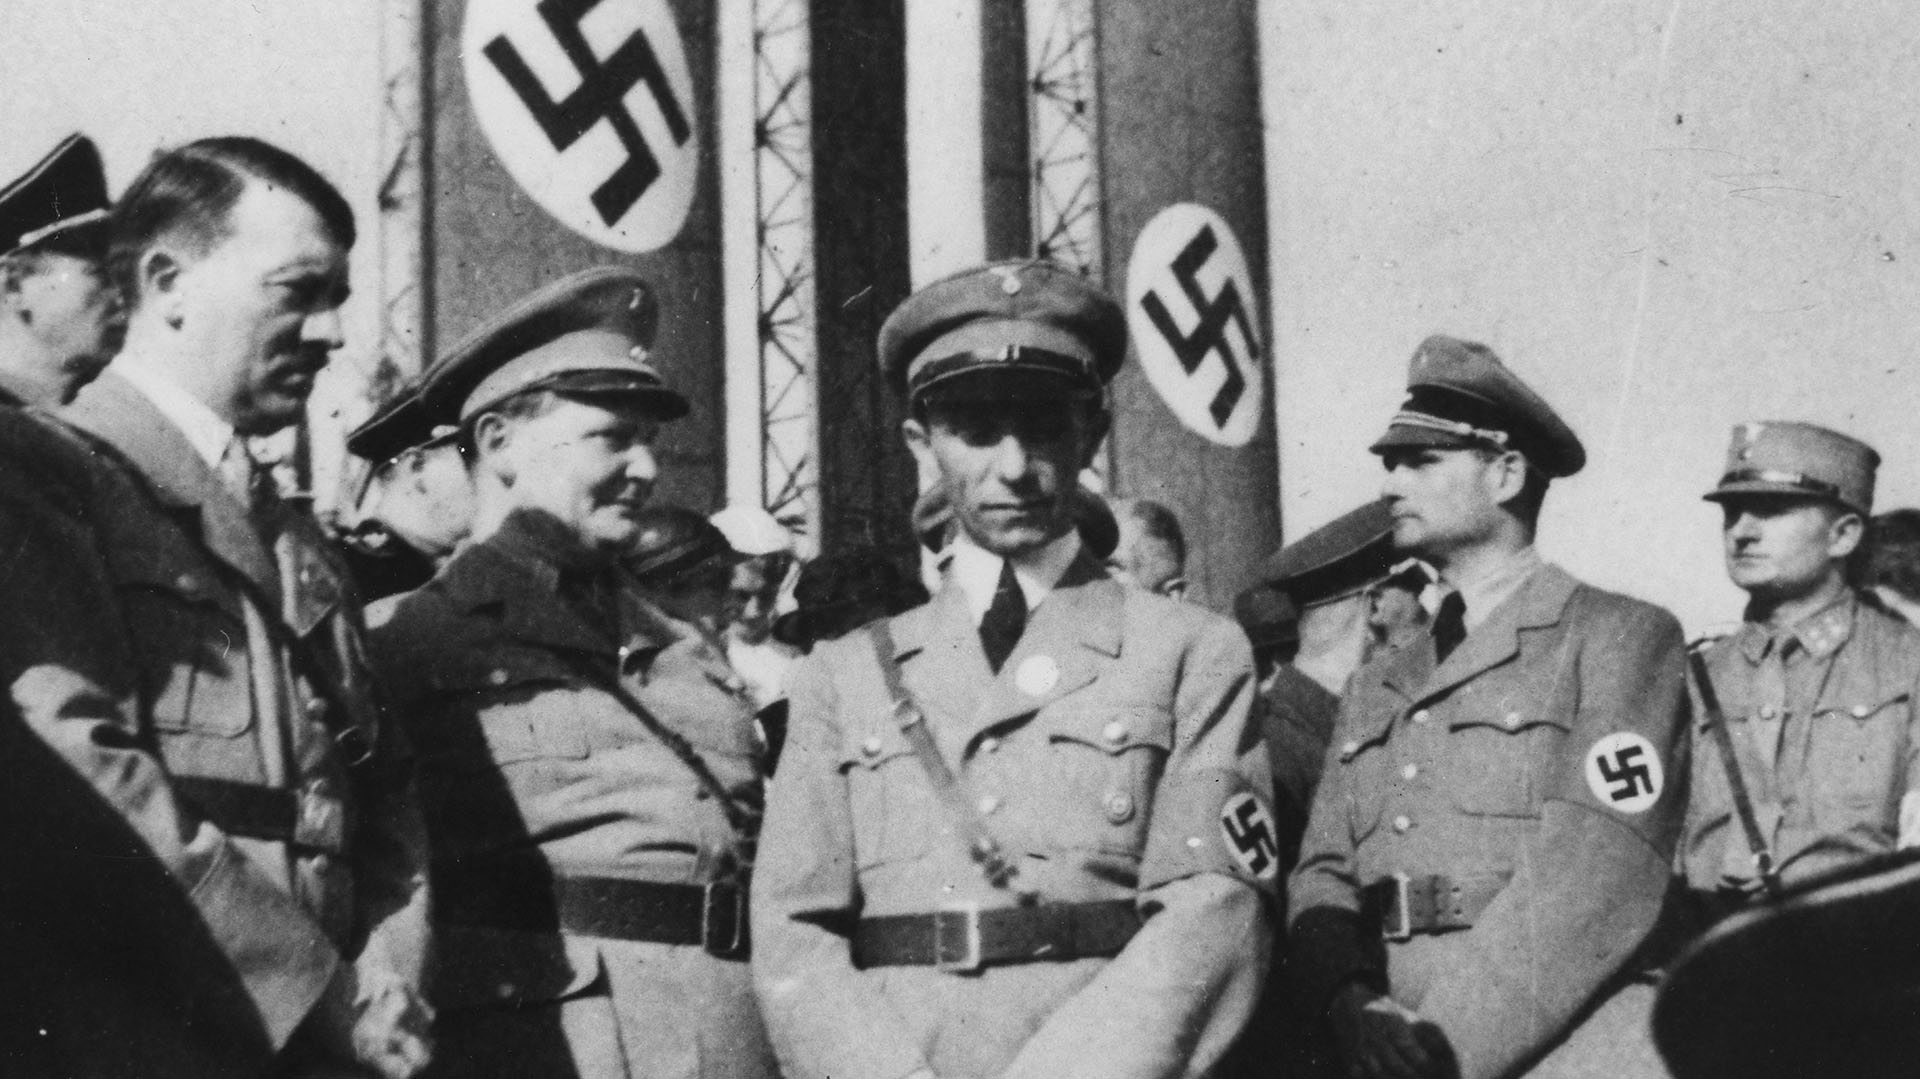 La jerarquía nazi: Hitler, Goering, Goebbels (en el centro) y Hess (National Archives and Records Administration/Wikimedia Commons)